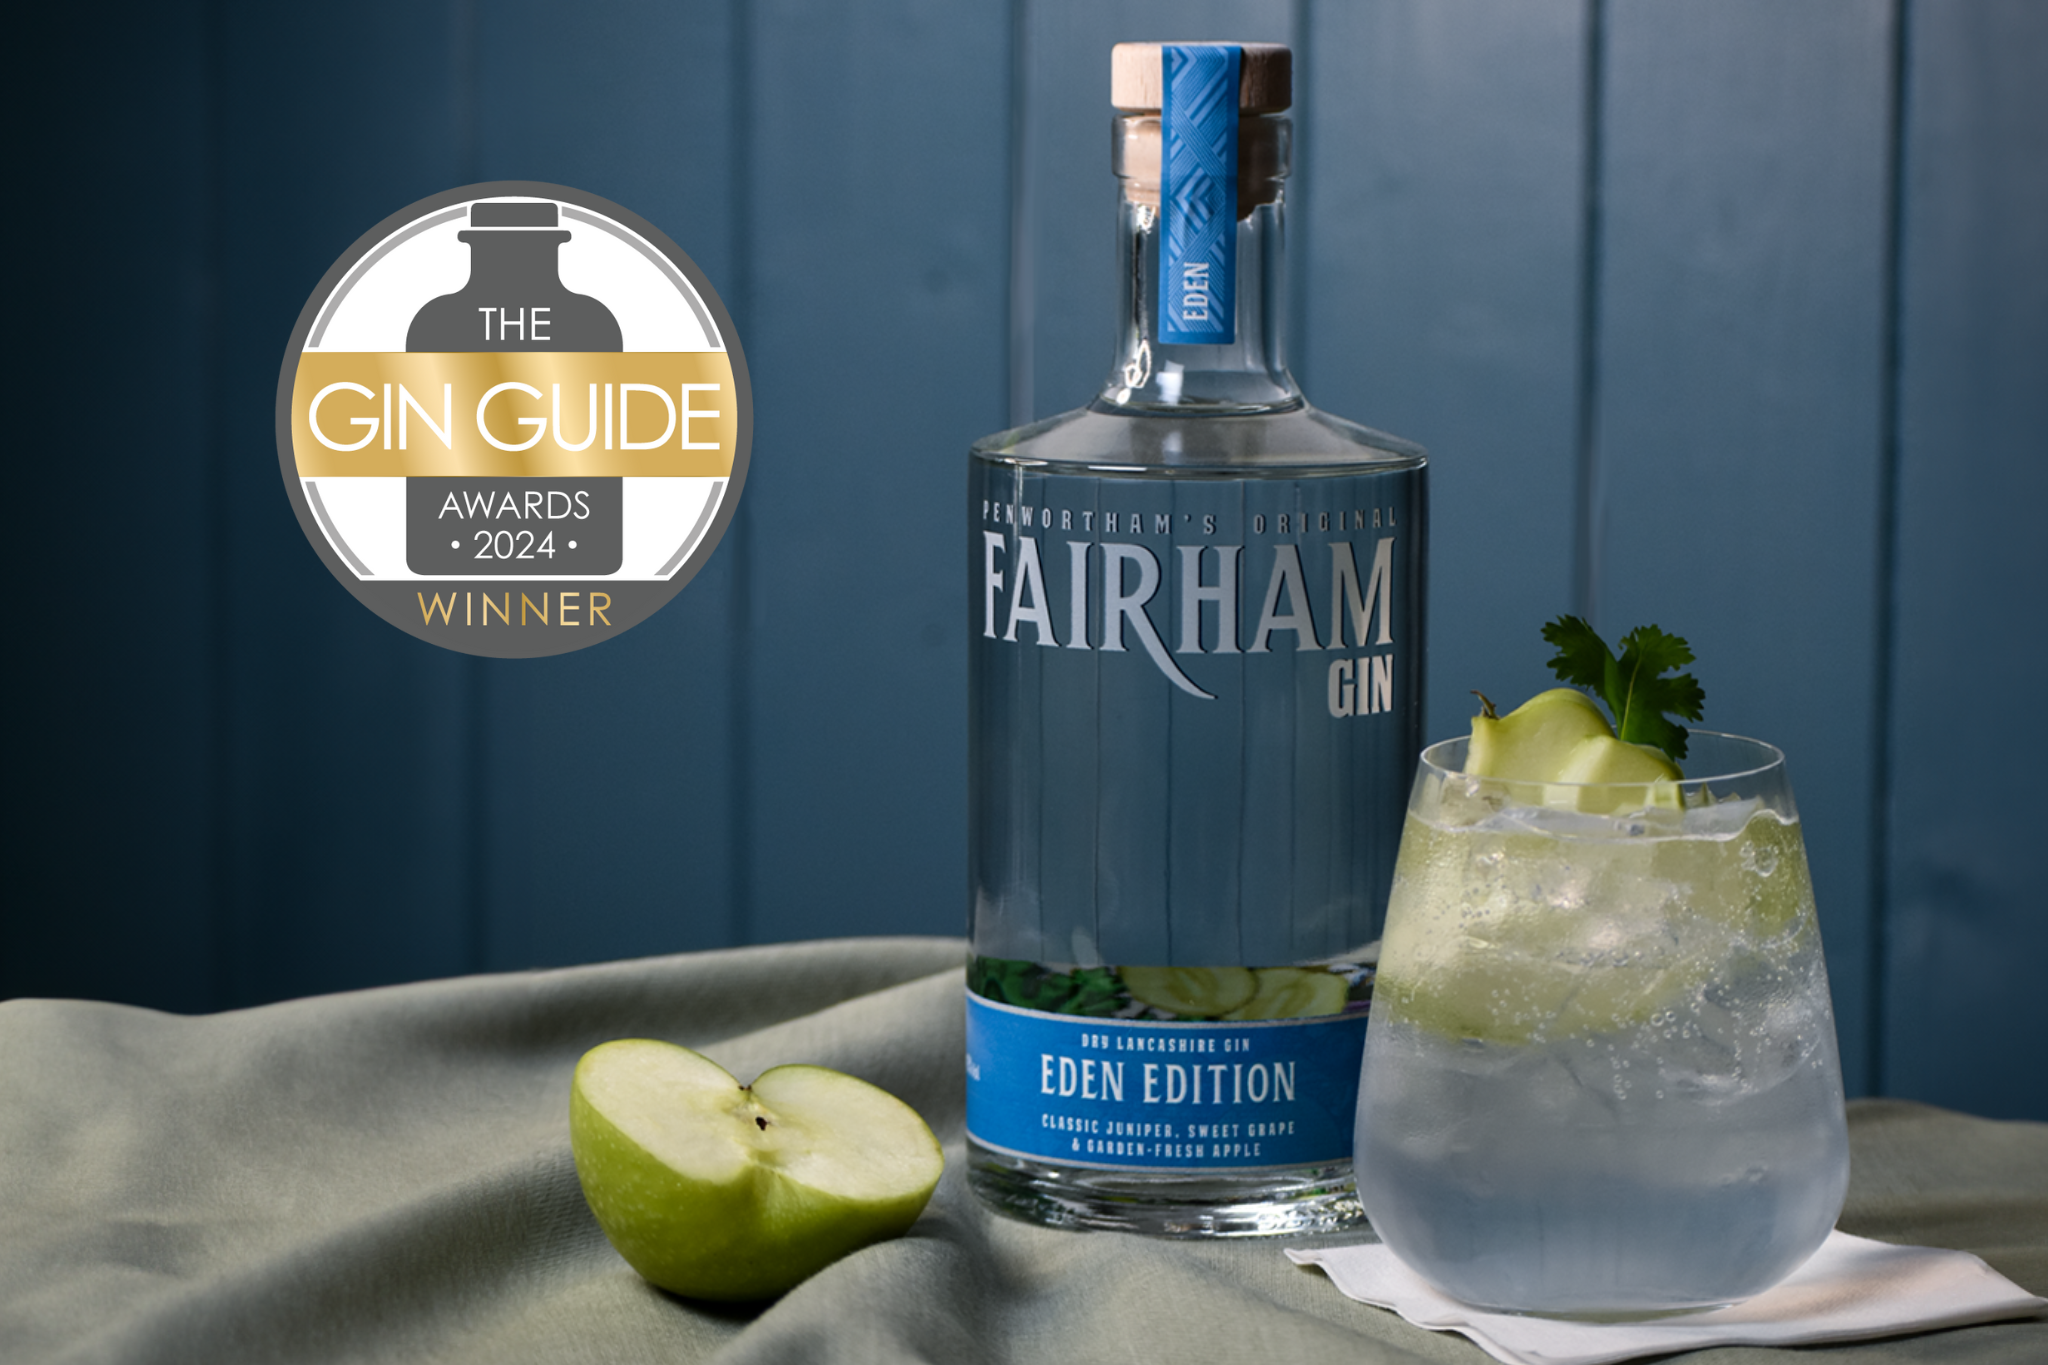 award winning lancashire gin The Gin Guide Awards apple gin, grape gin, daringly different unique